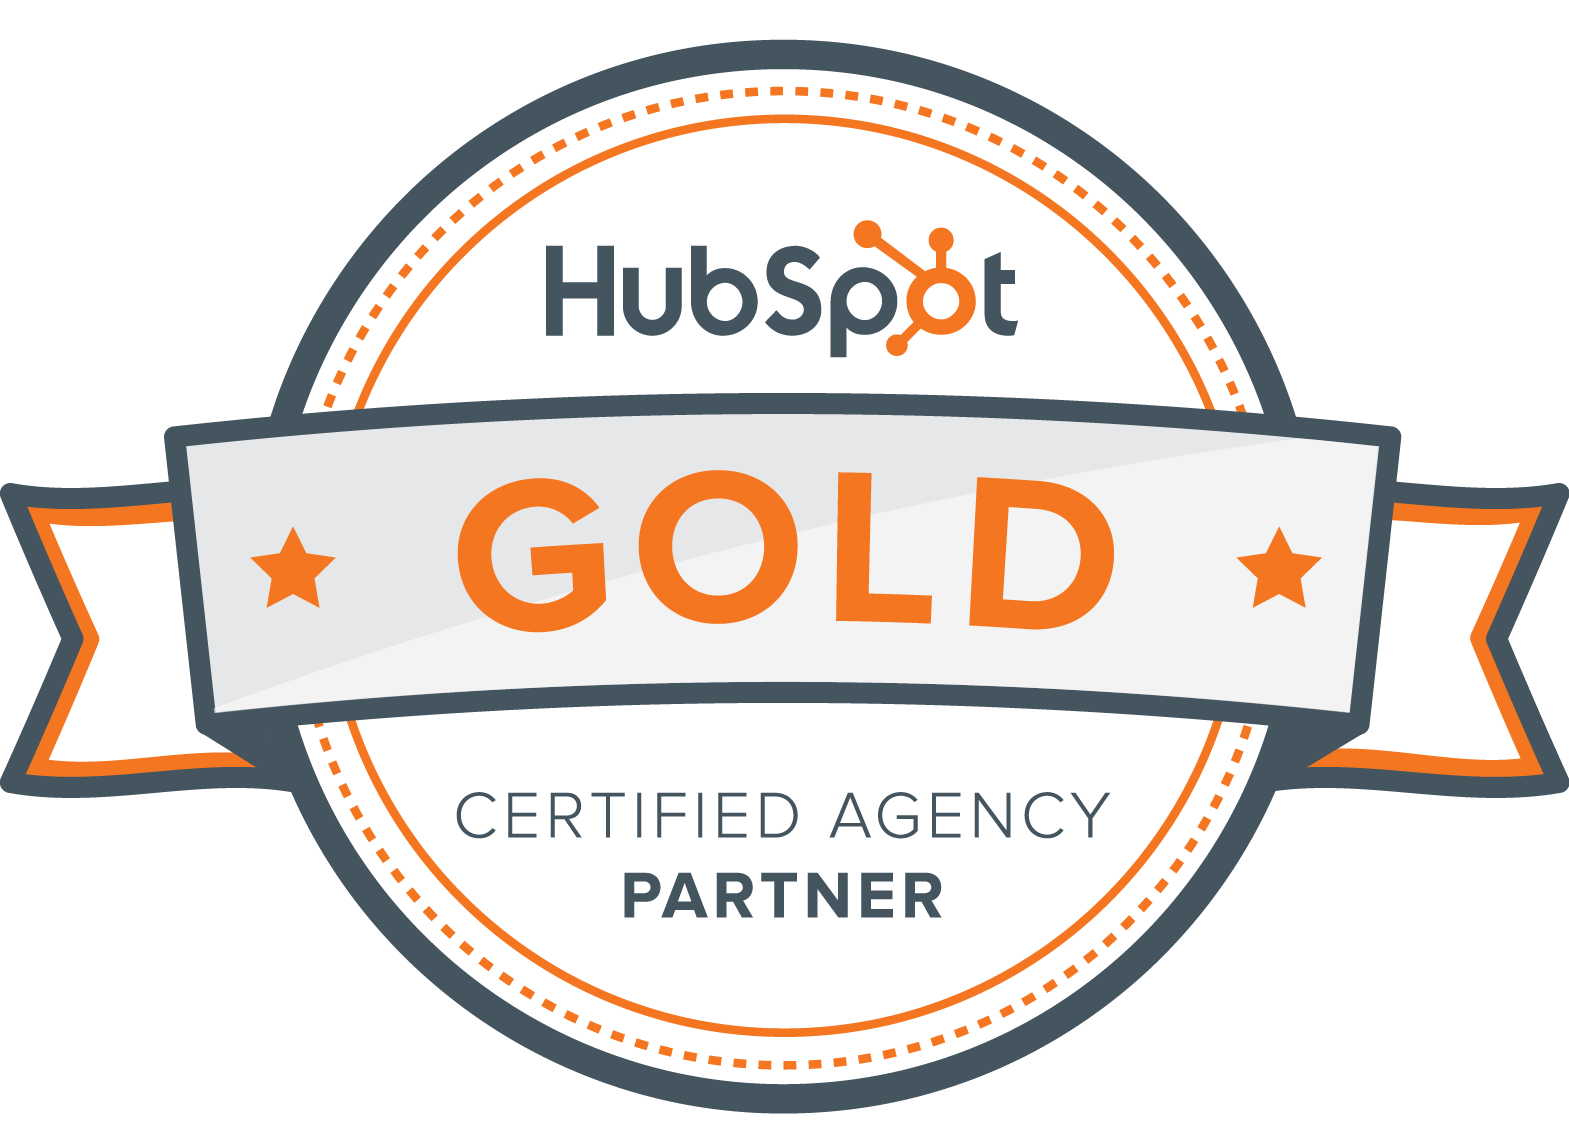 BRISTOL STRATEGY BECOMES A HUBSPOT GOLD CERTIFIED AGENCY